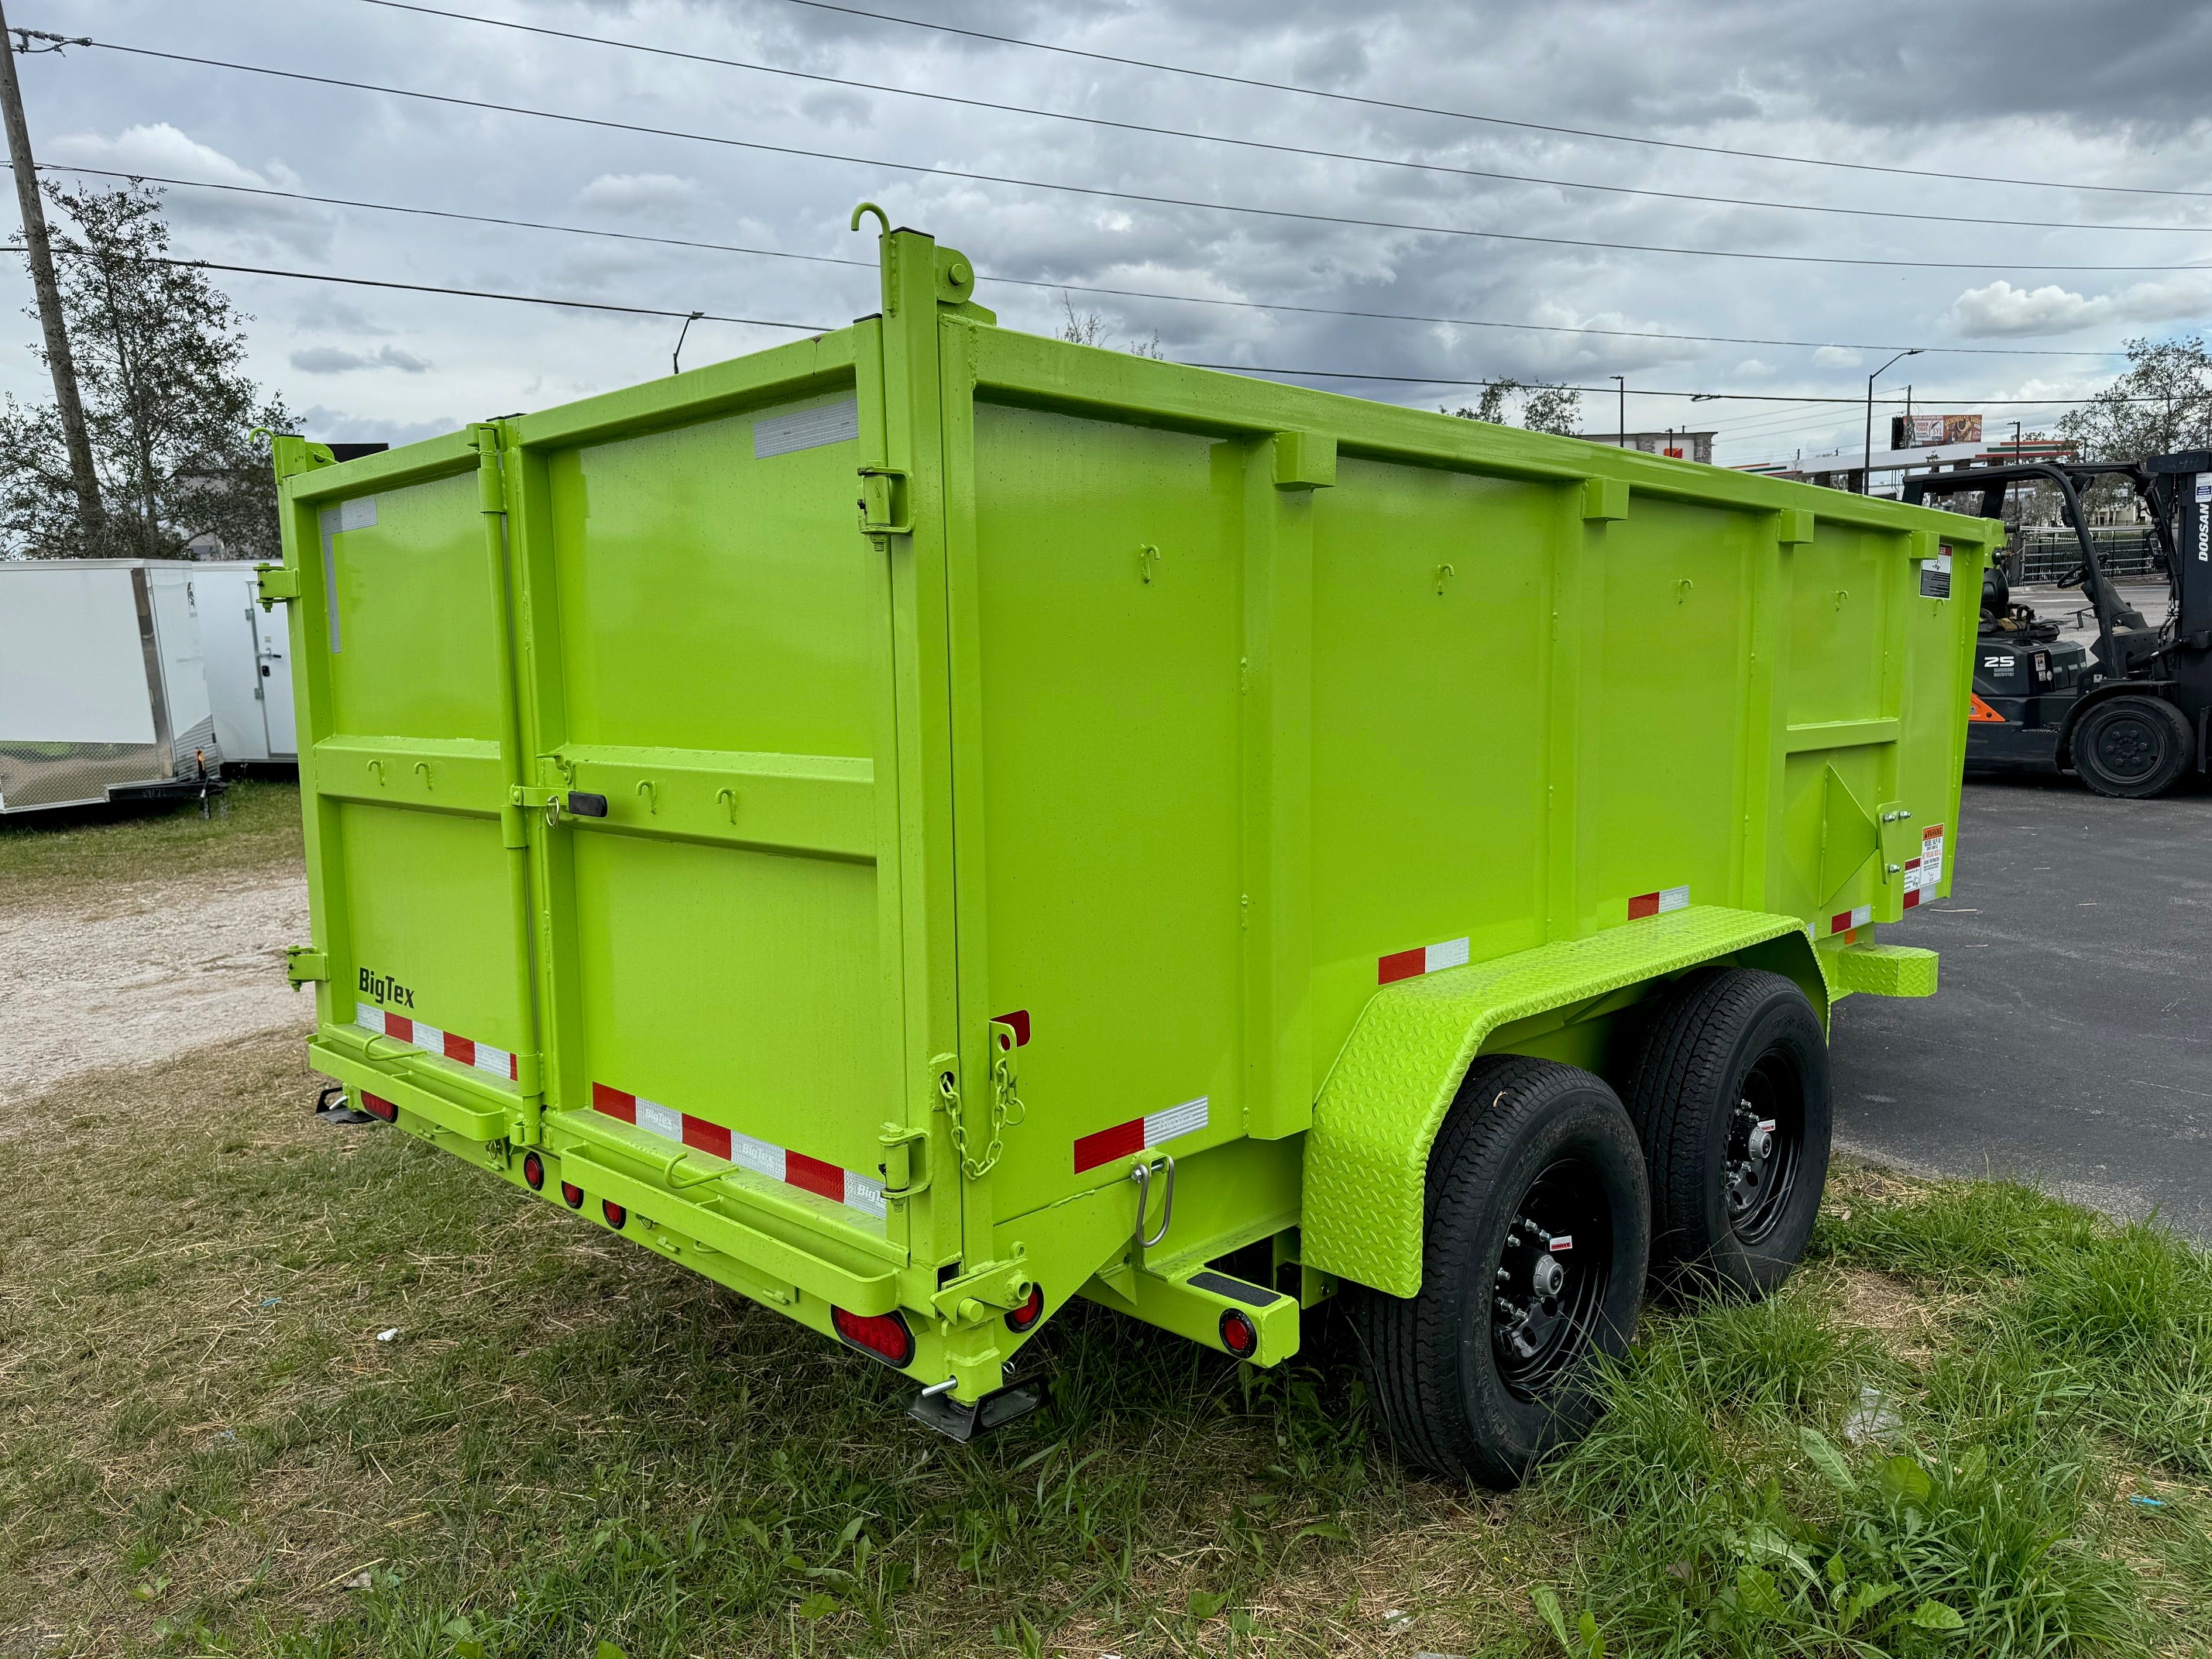 14 Foot Big Tex Heavy Duty Low Profile with Spreader Gate and High Sides Slime Green Dump Trailer (14LP-14SG6-P4) (SOLD 4/6/2024)